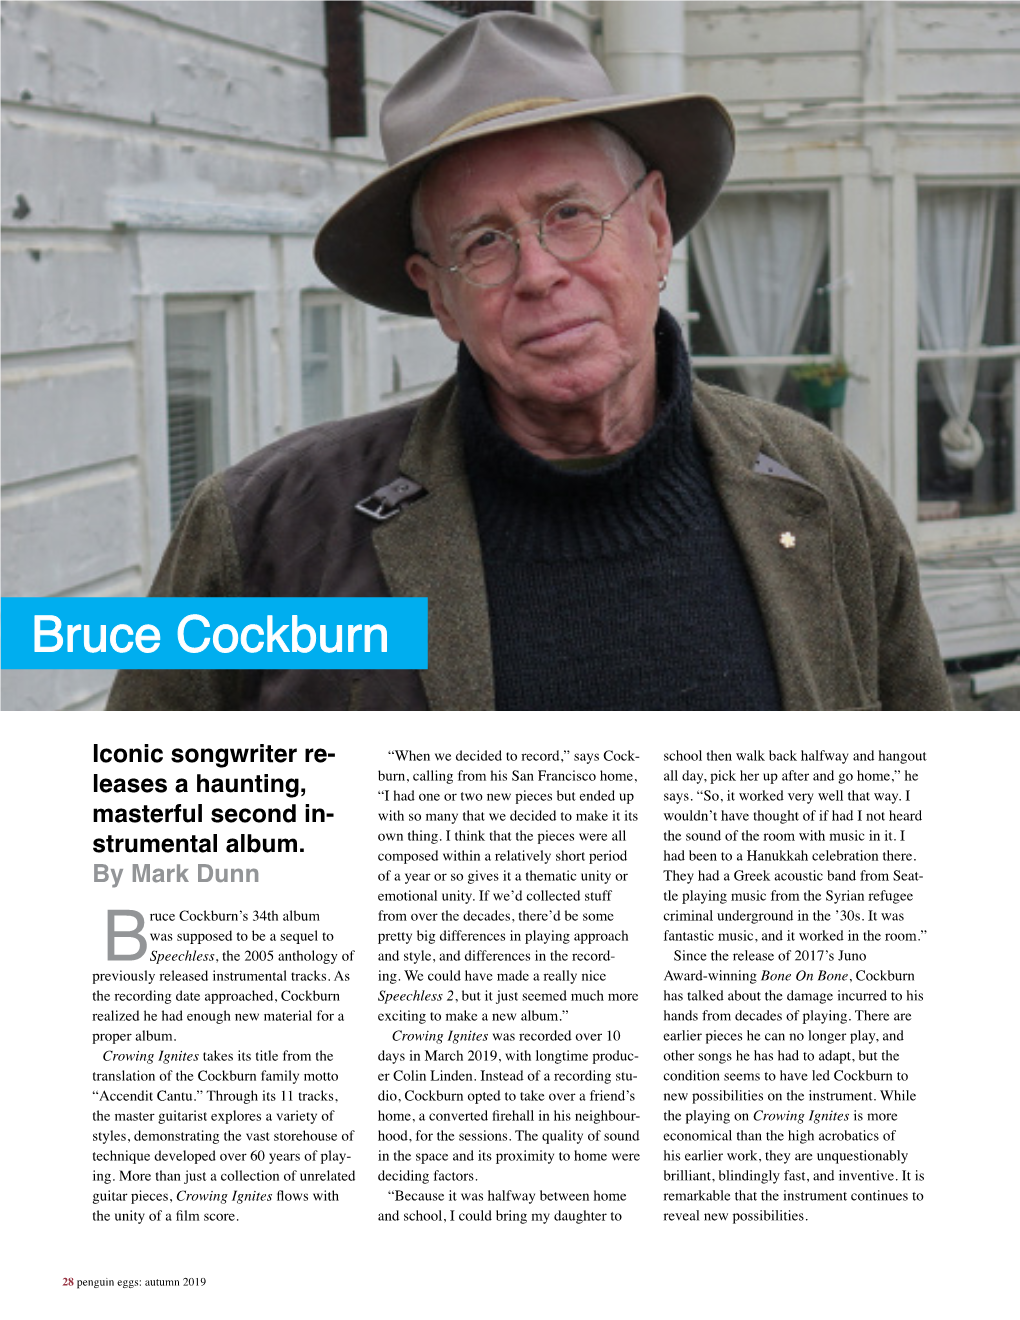 Here Is an Article About and Interview with Bruce